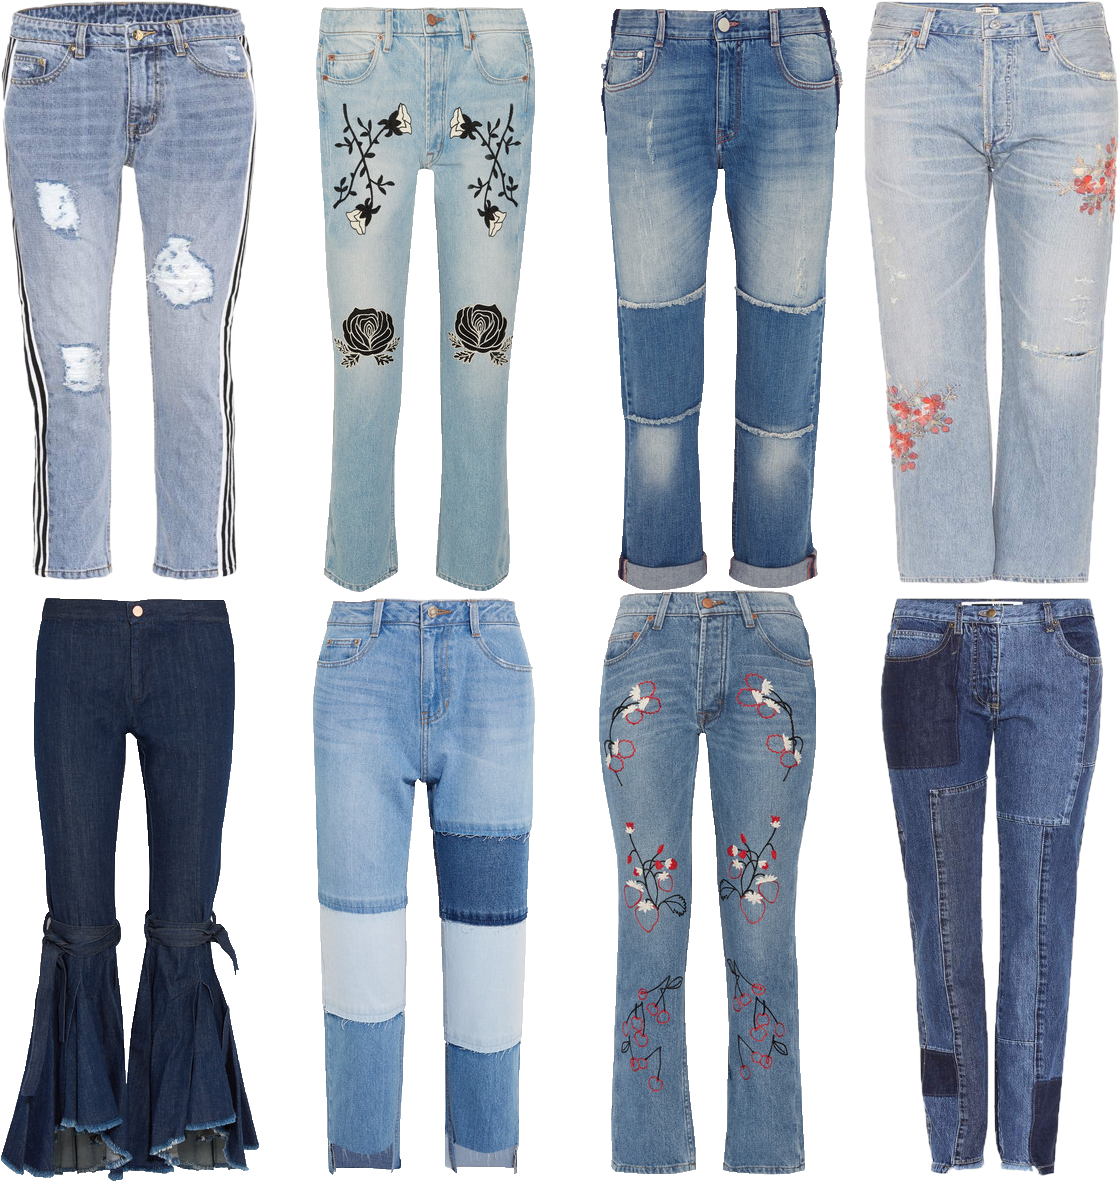 Varietyof Womens Jeans Styles